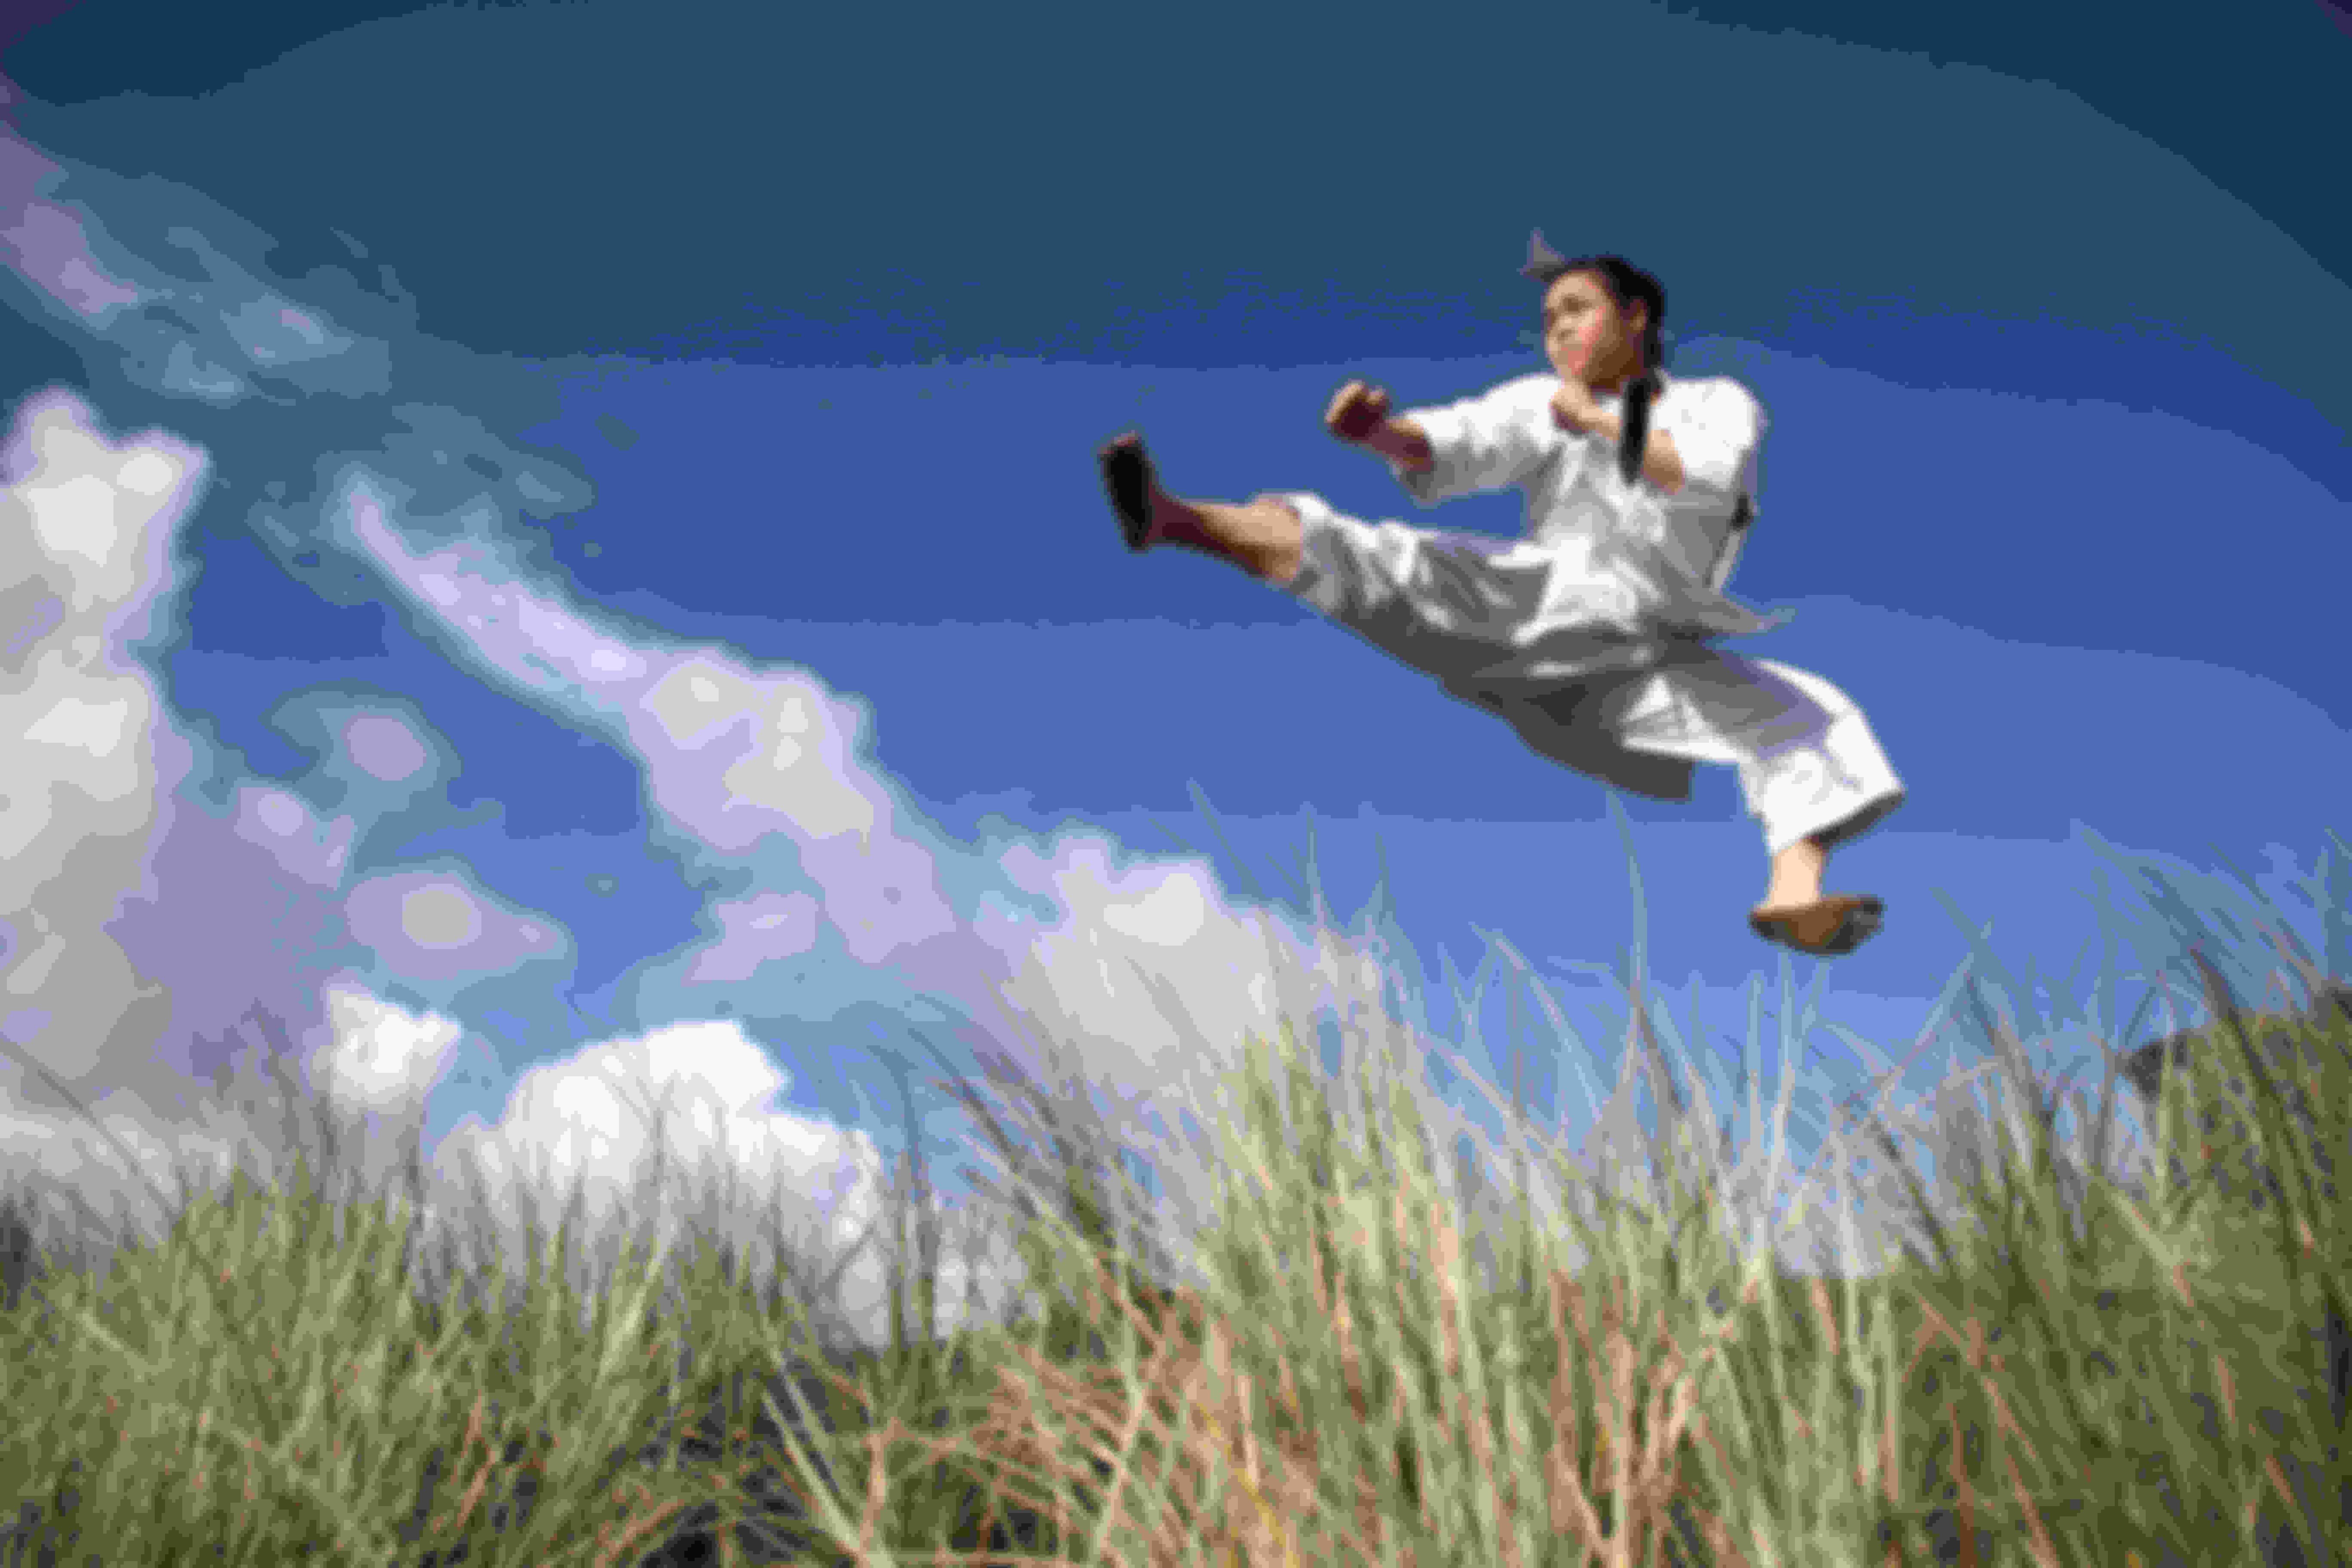 The quest for karate to be included in the Games has been active since the 1970s but was given the nod only recently. 